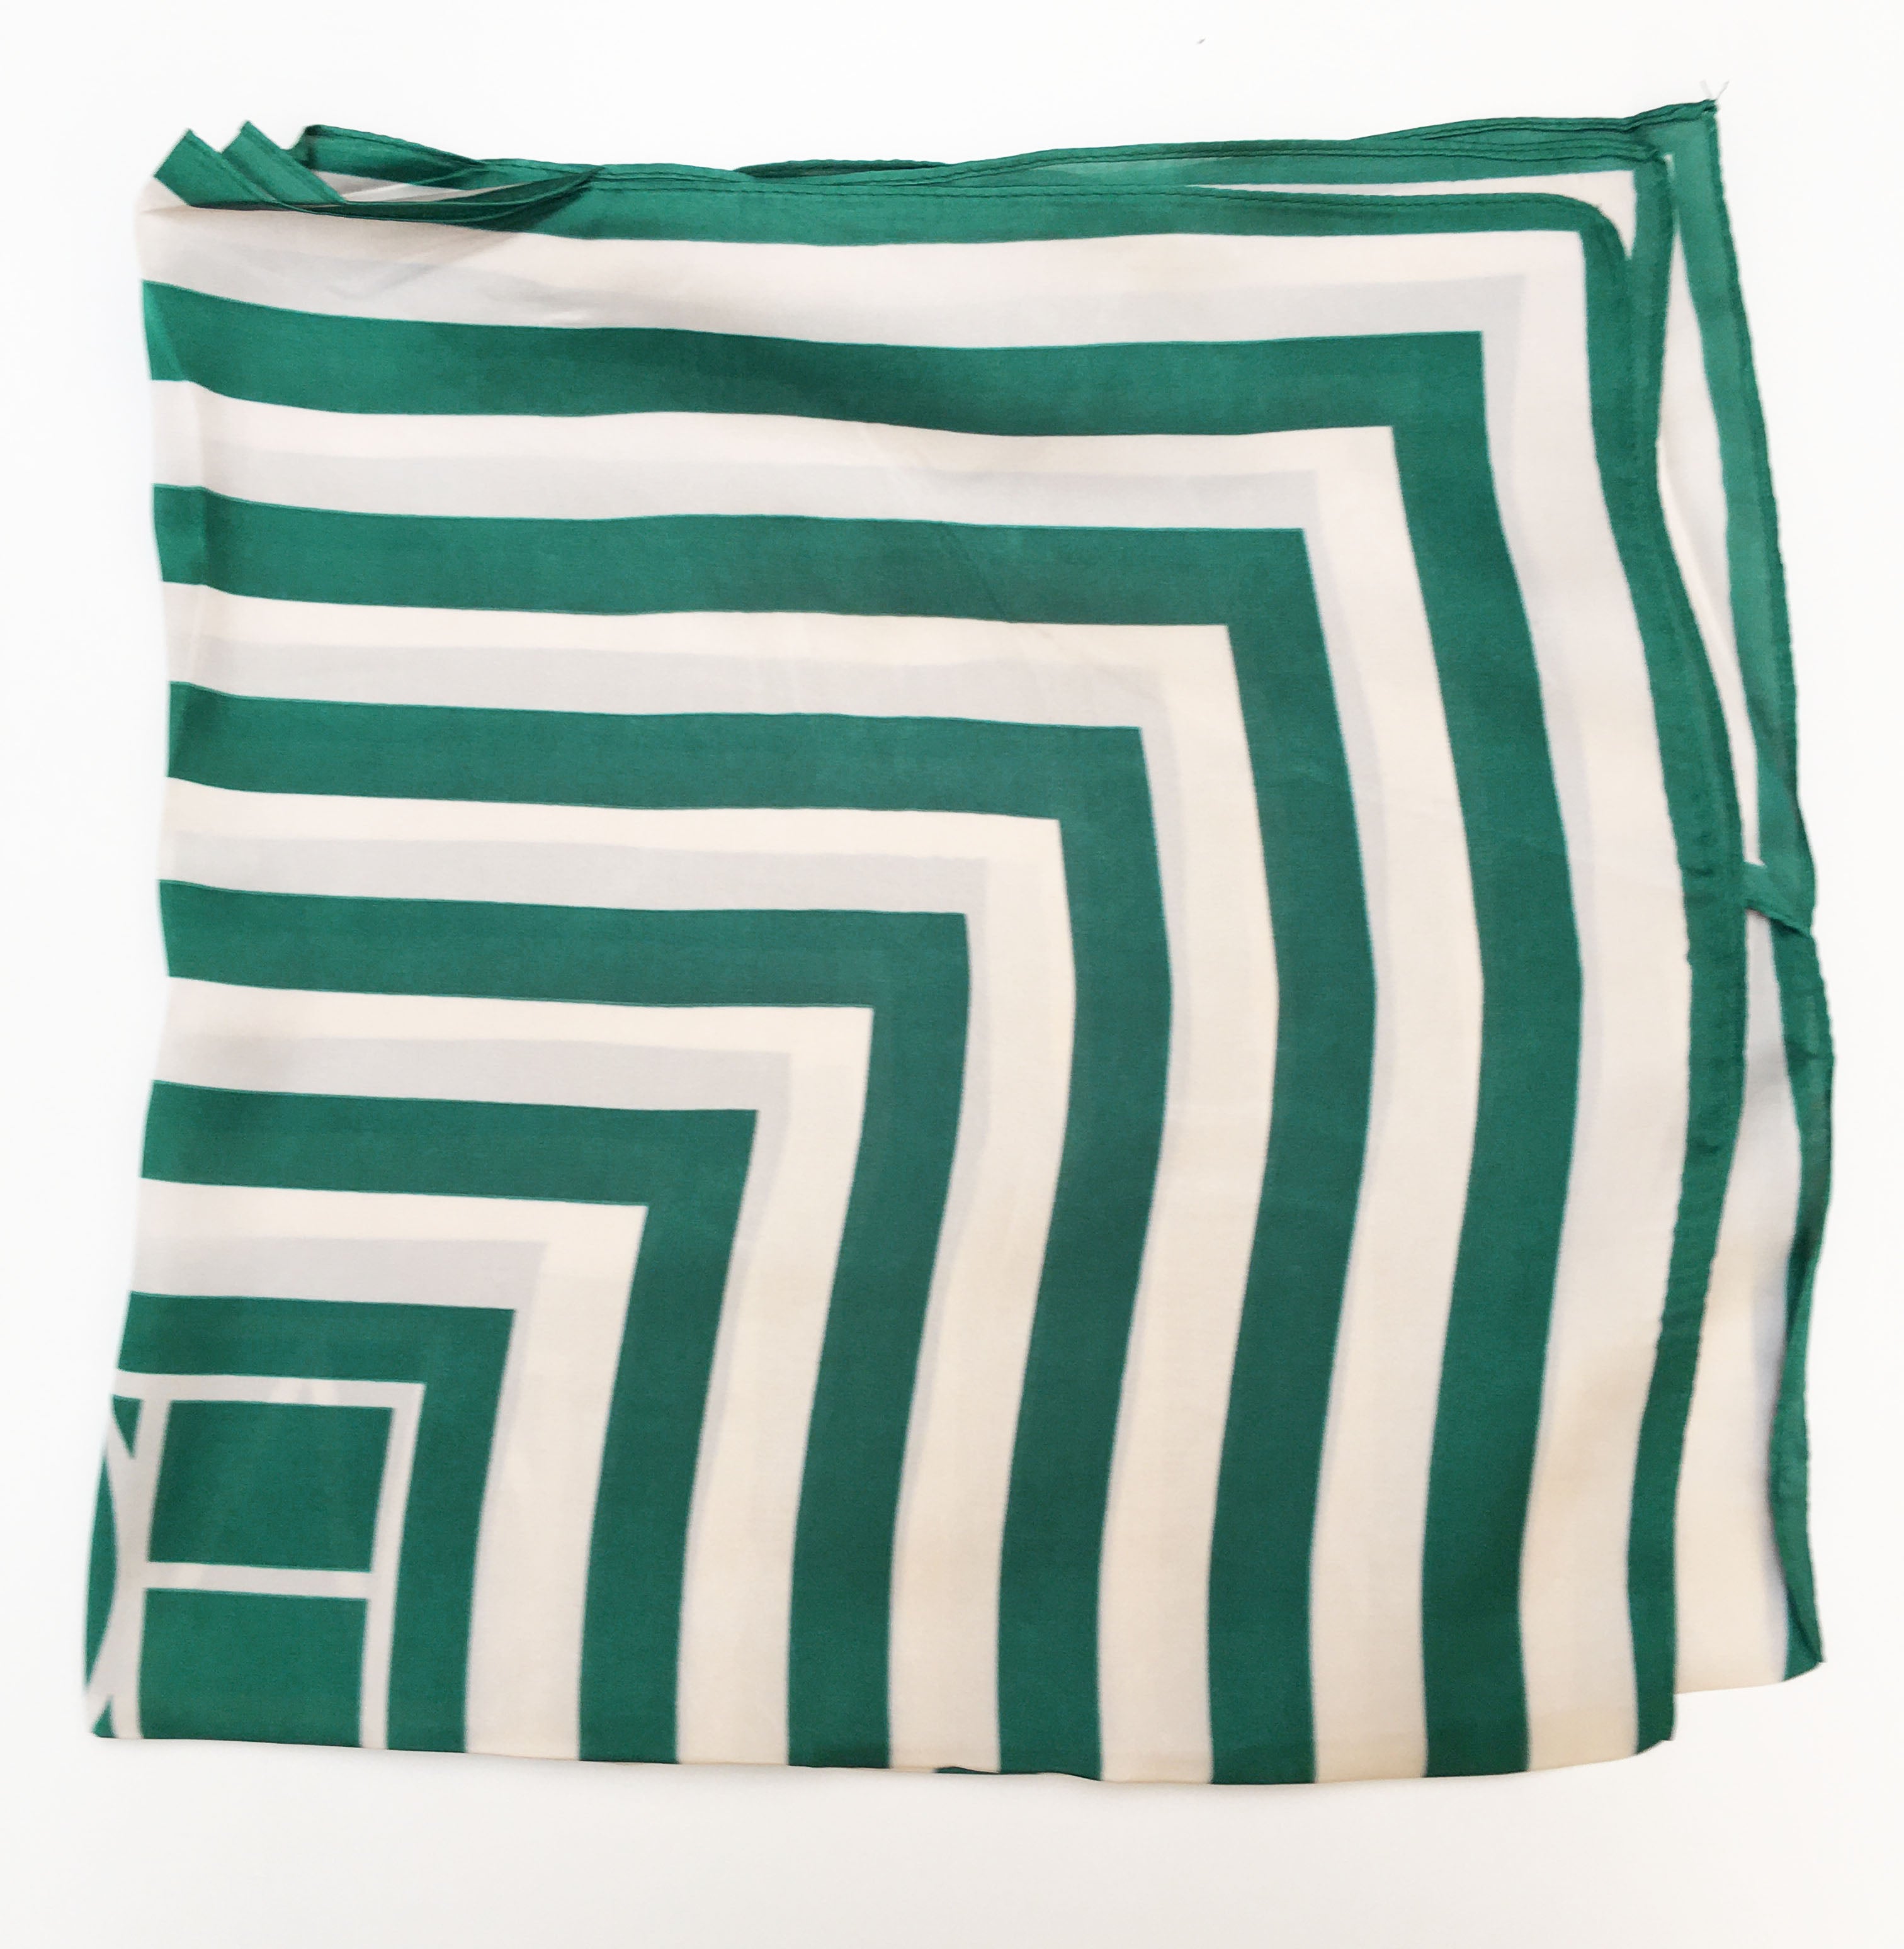 70cm x 70cm Square Scarf Green and White Stripes Scarf Thin Silky Womens Summer Spring